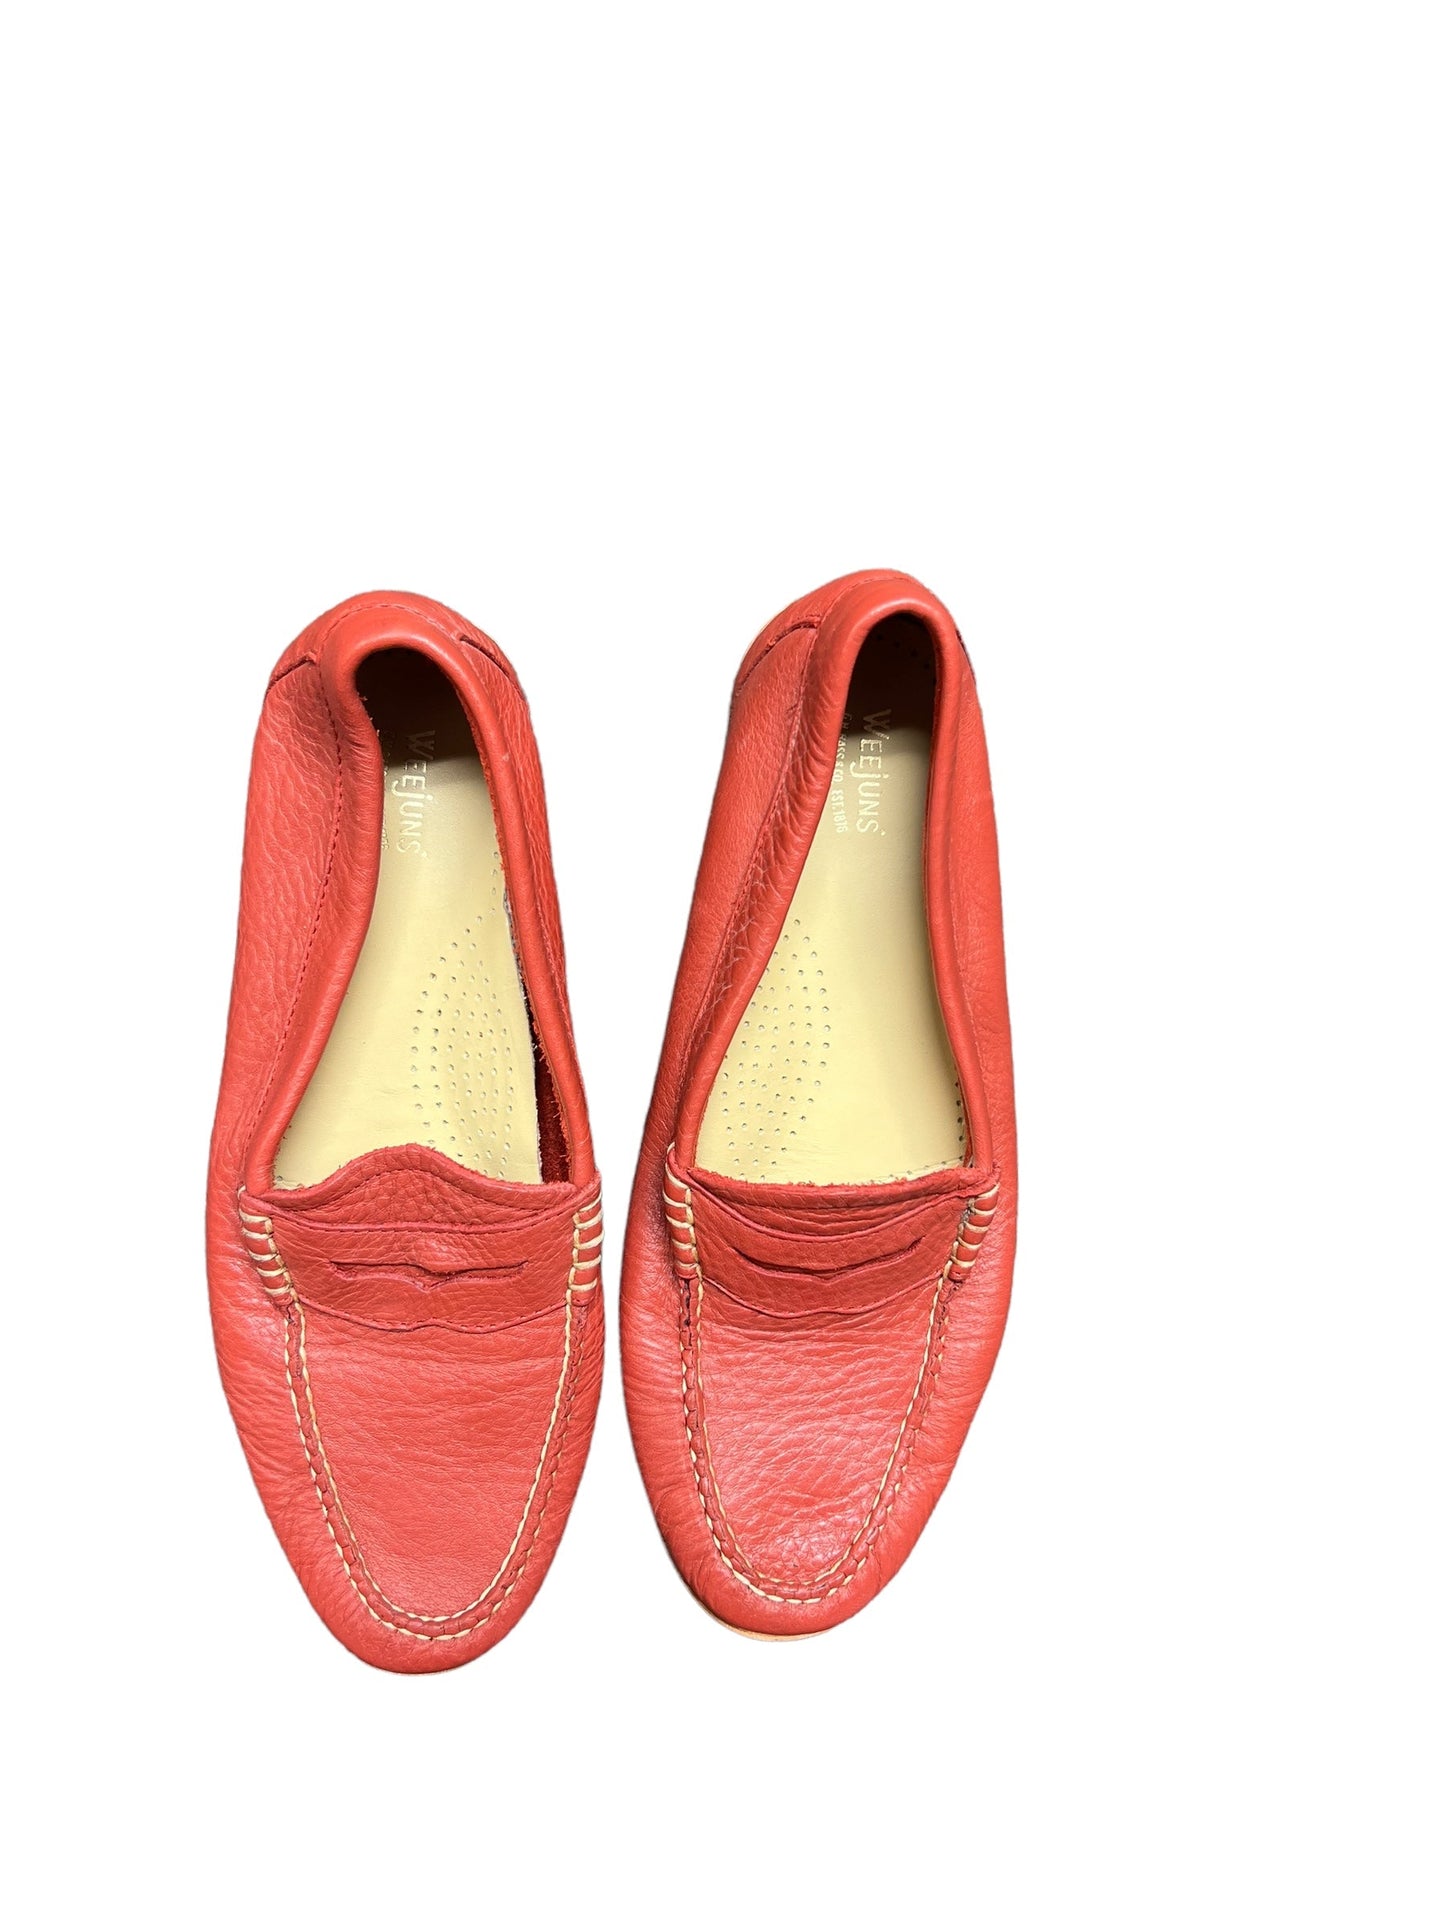 Red Shoes Flats Cma, Size 9